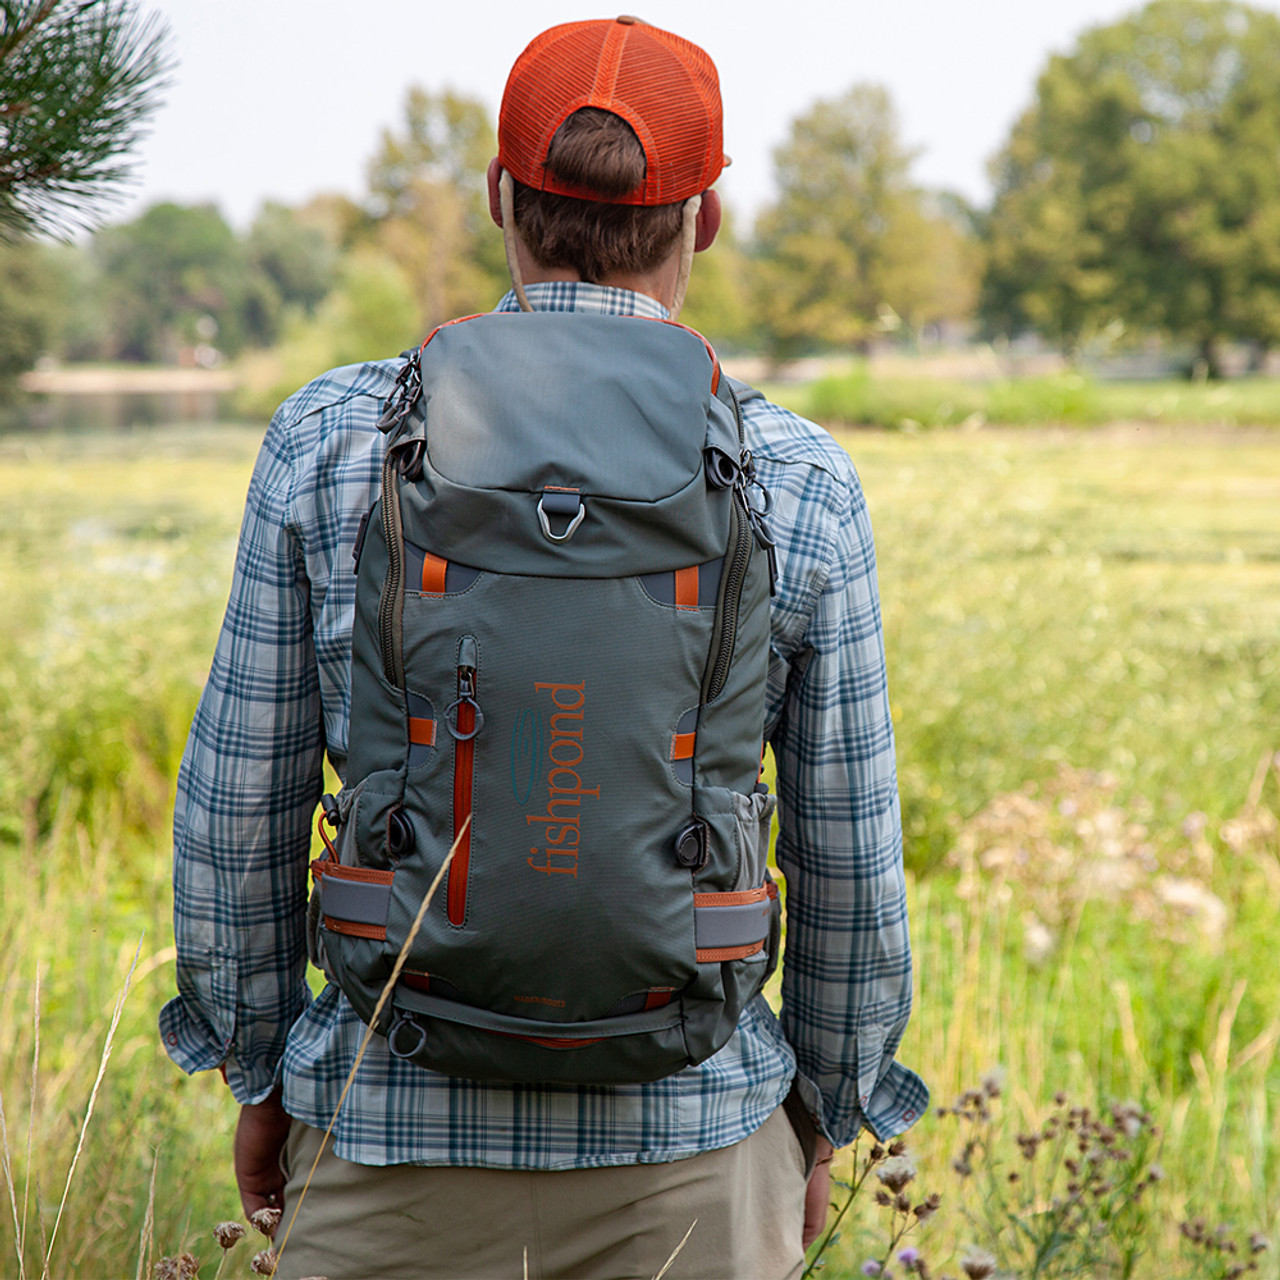 Fishpond Firehole Backpack at The Fly Shop